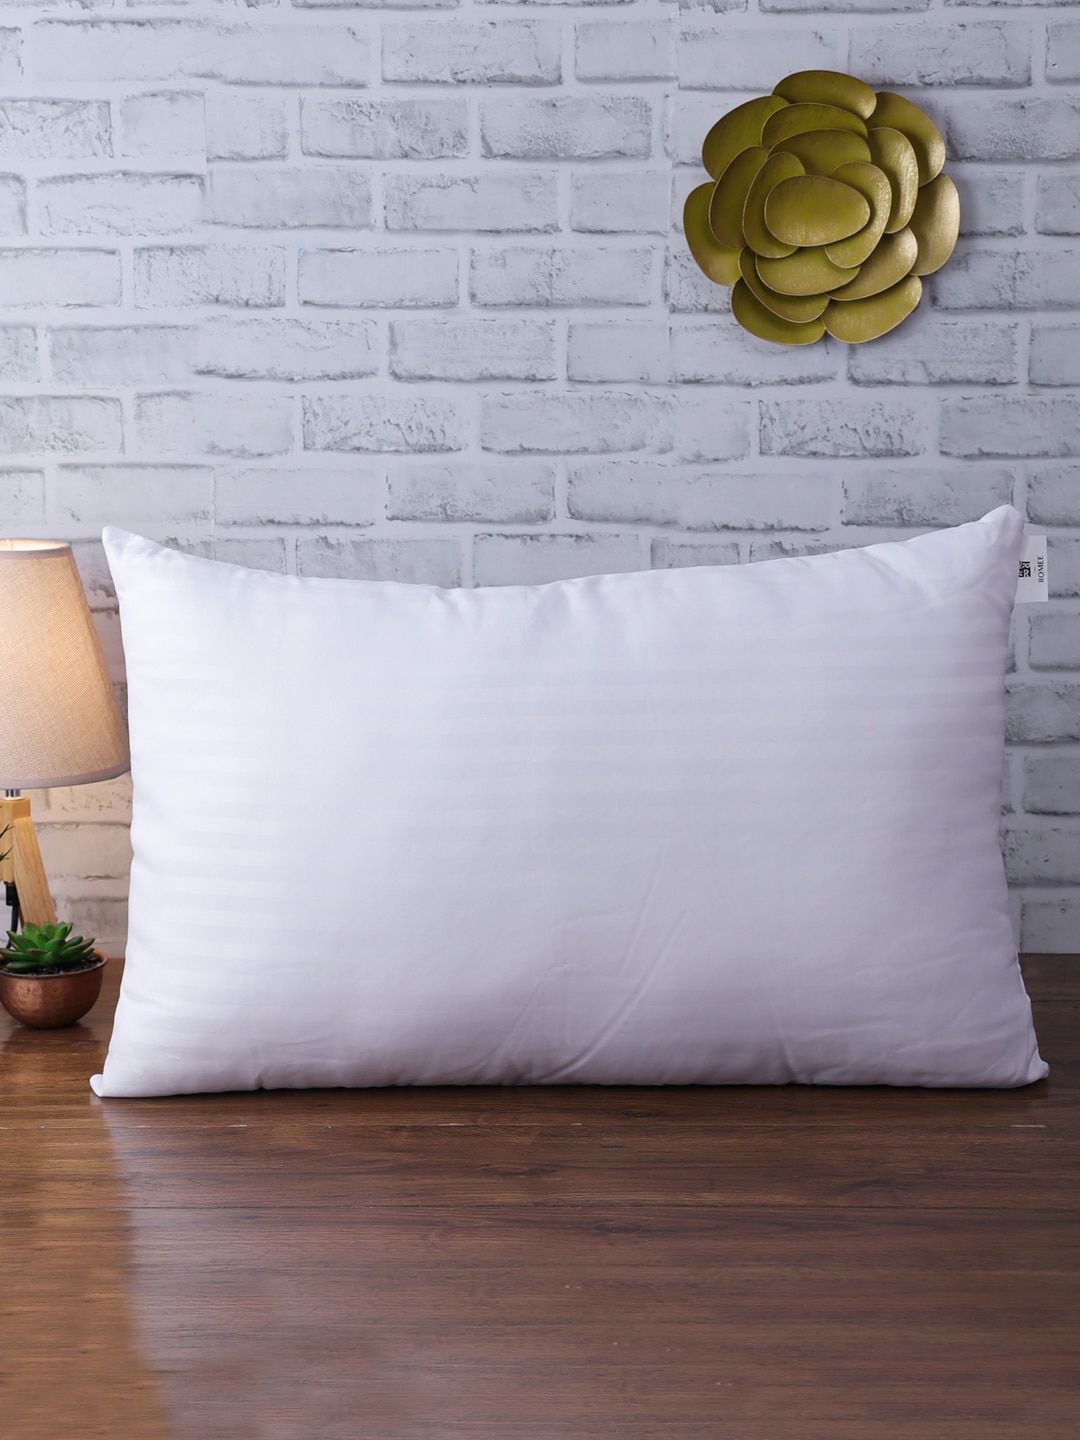 ROMEE White Striped Bed Pillow Price in India